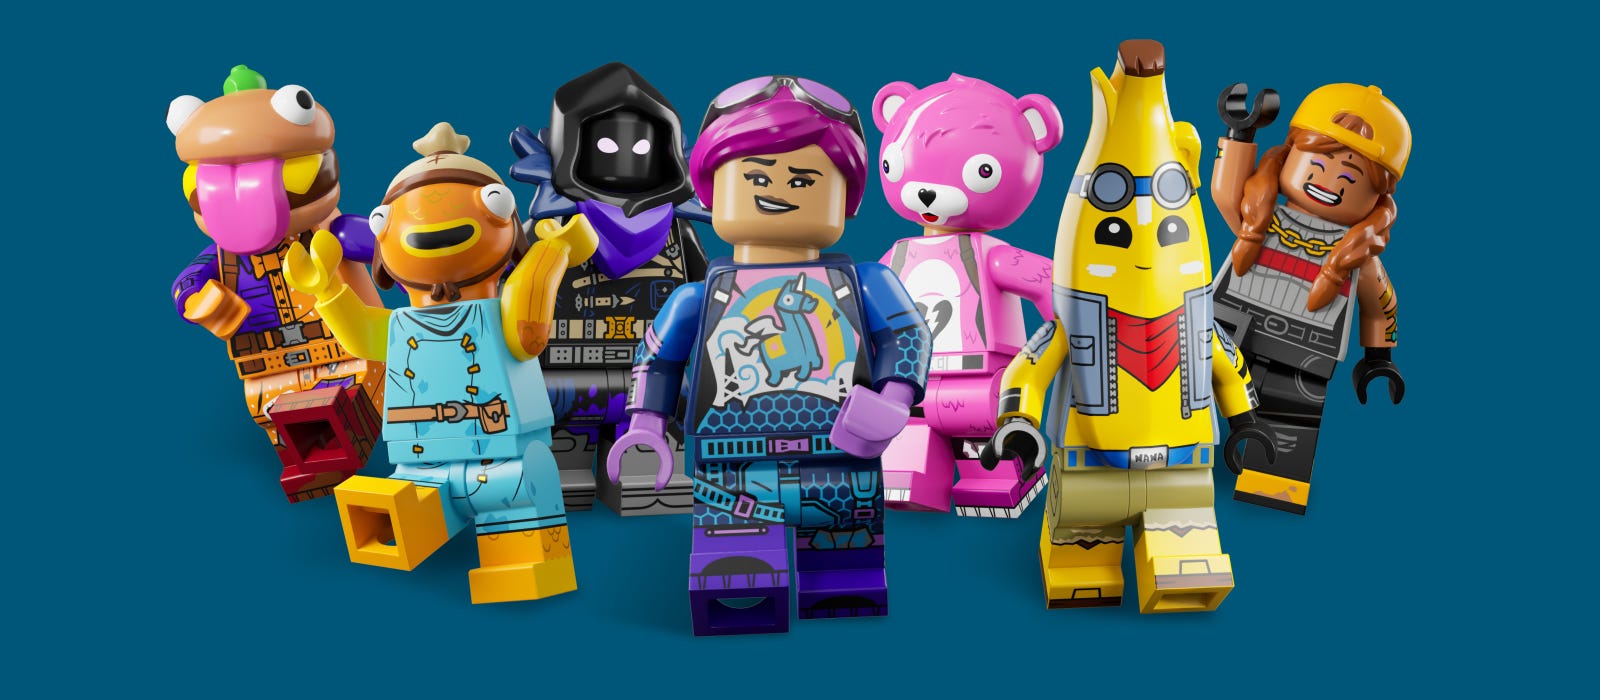 LEGO® Minifigures  Official LEGO® IN